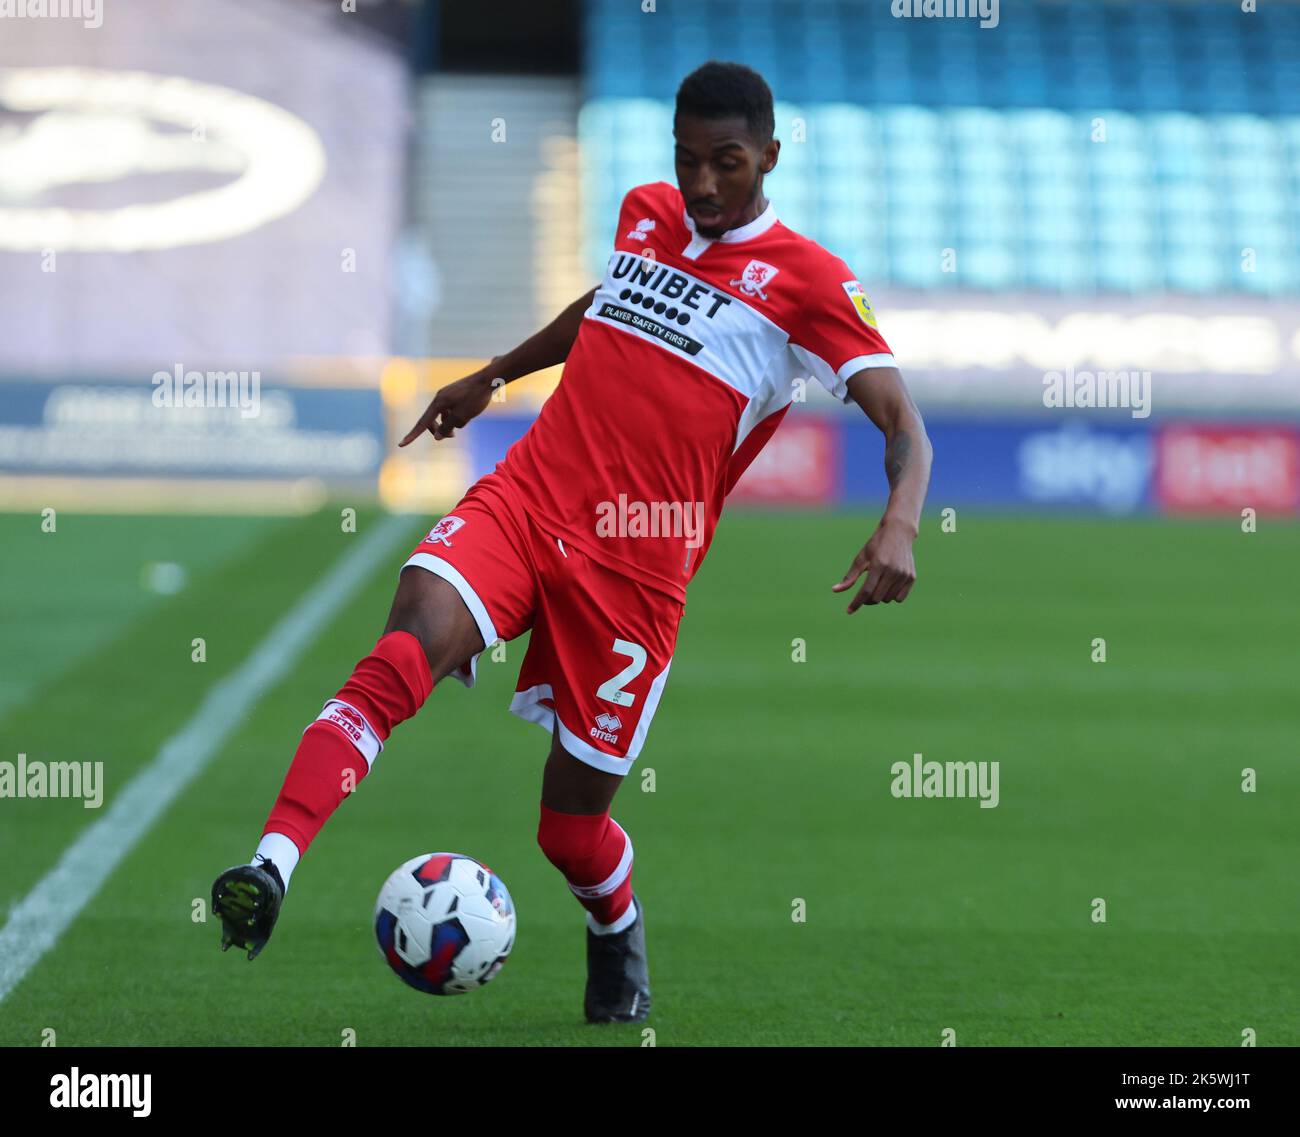 LONDON ENGLAND - OCTOBER  08 : Isaiah Jones of Middlesbrough during Championship match between Millwall against Middlesborough at The Den, London on 0 Stock Photo